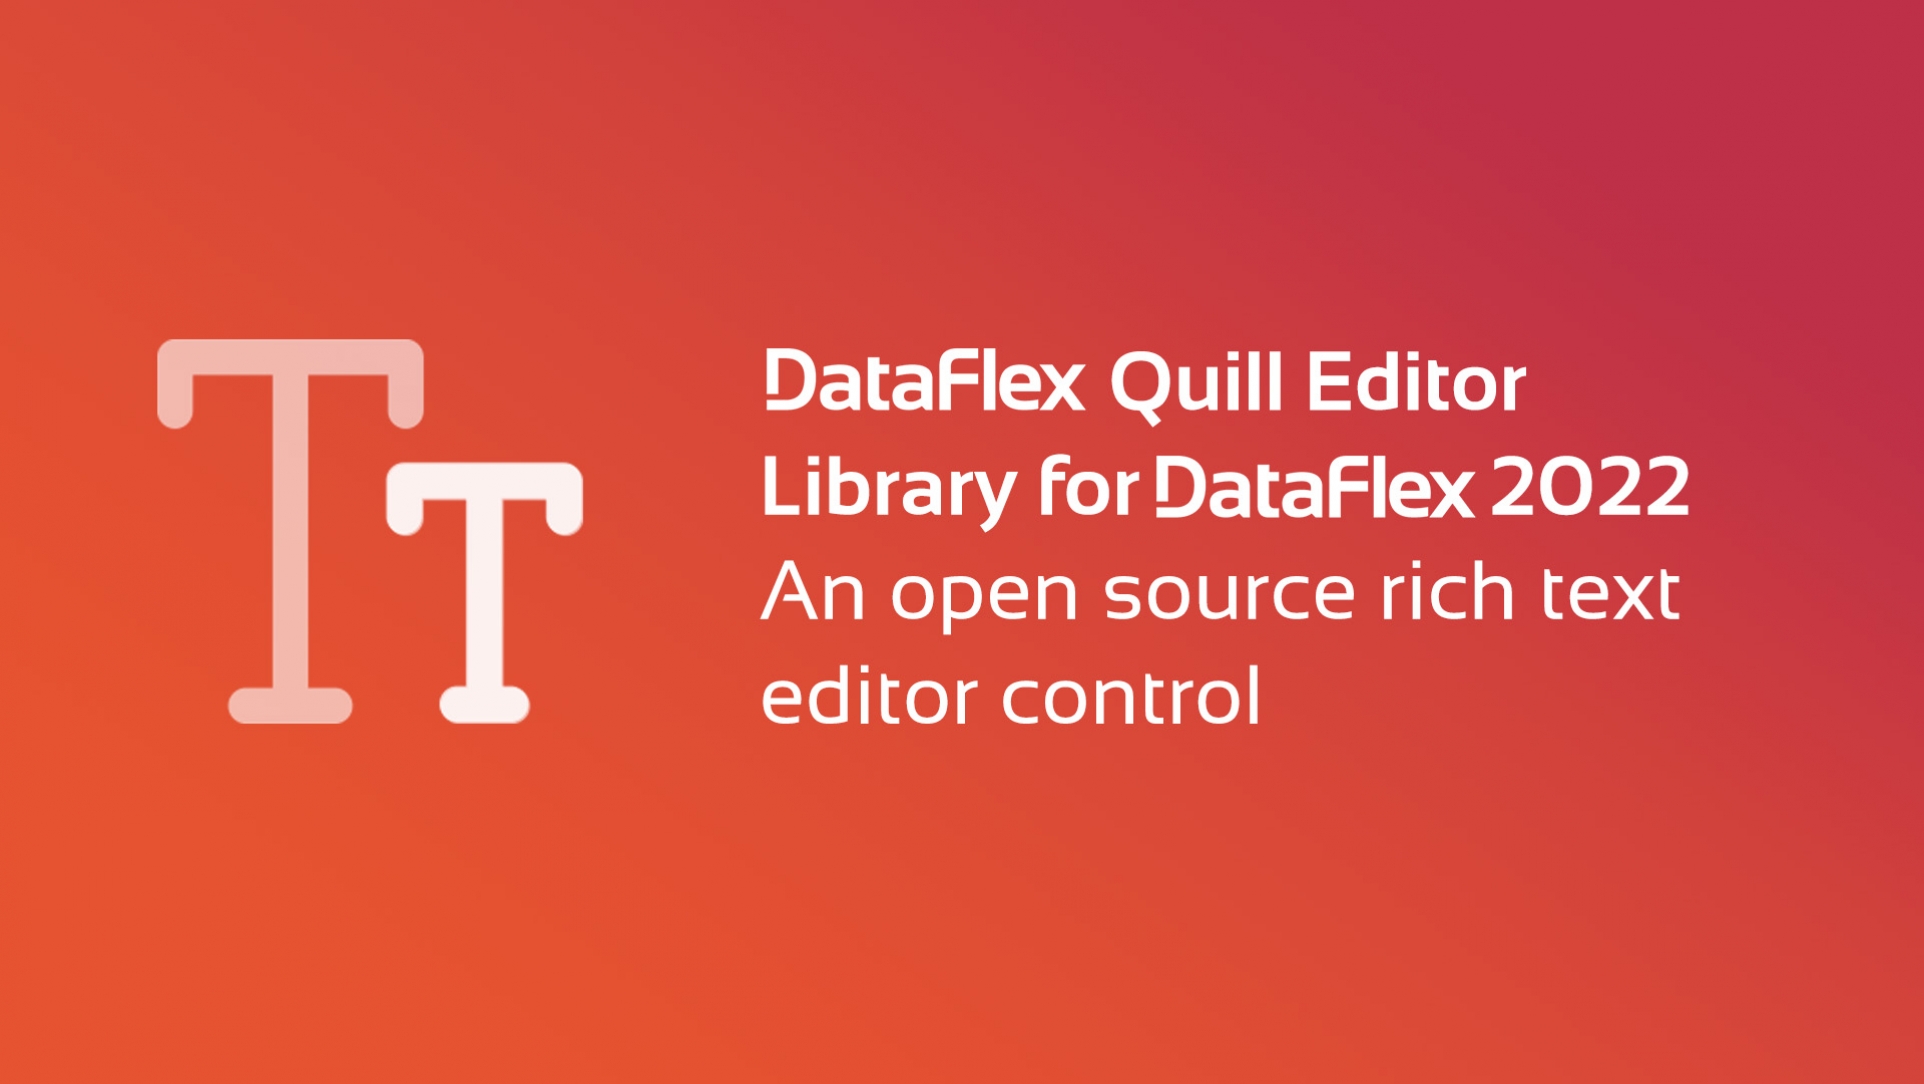 Free Quill Editor Library for DataFlex 2022